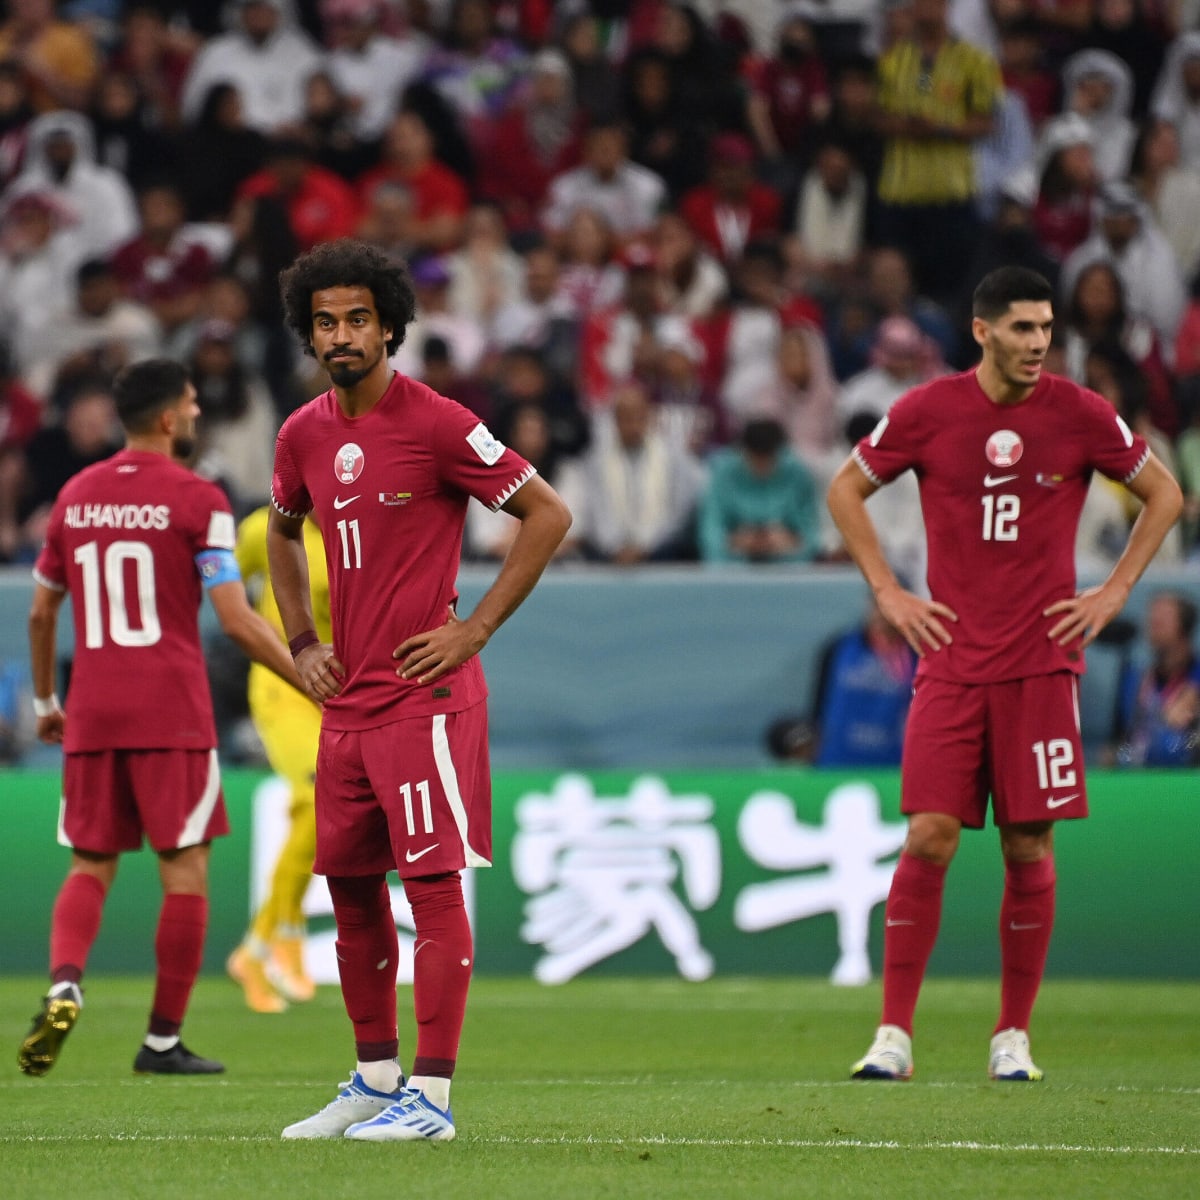 Qatar make World Cup history by losing to Ecuador in opening game